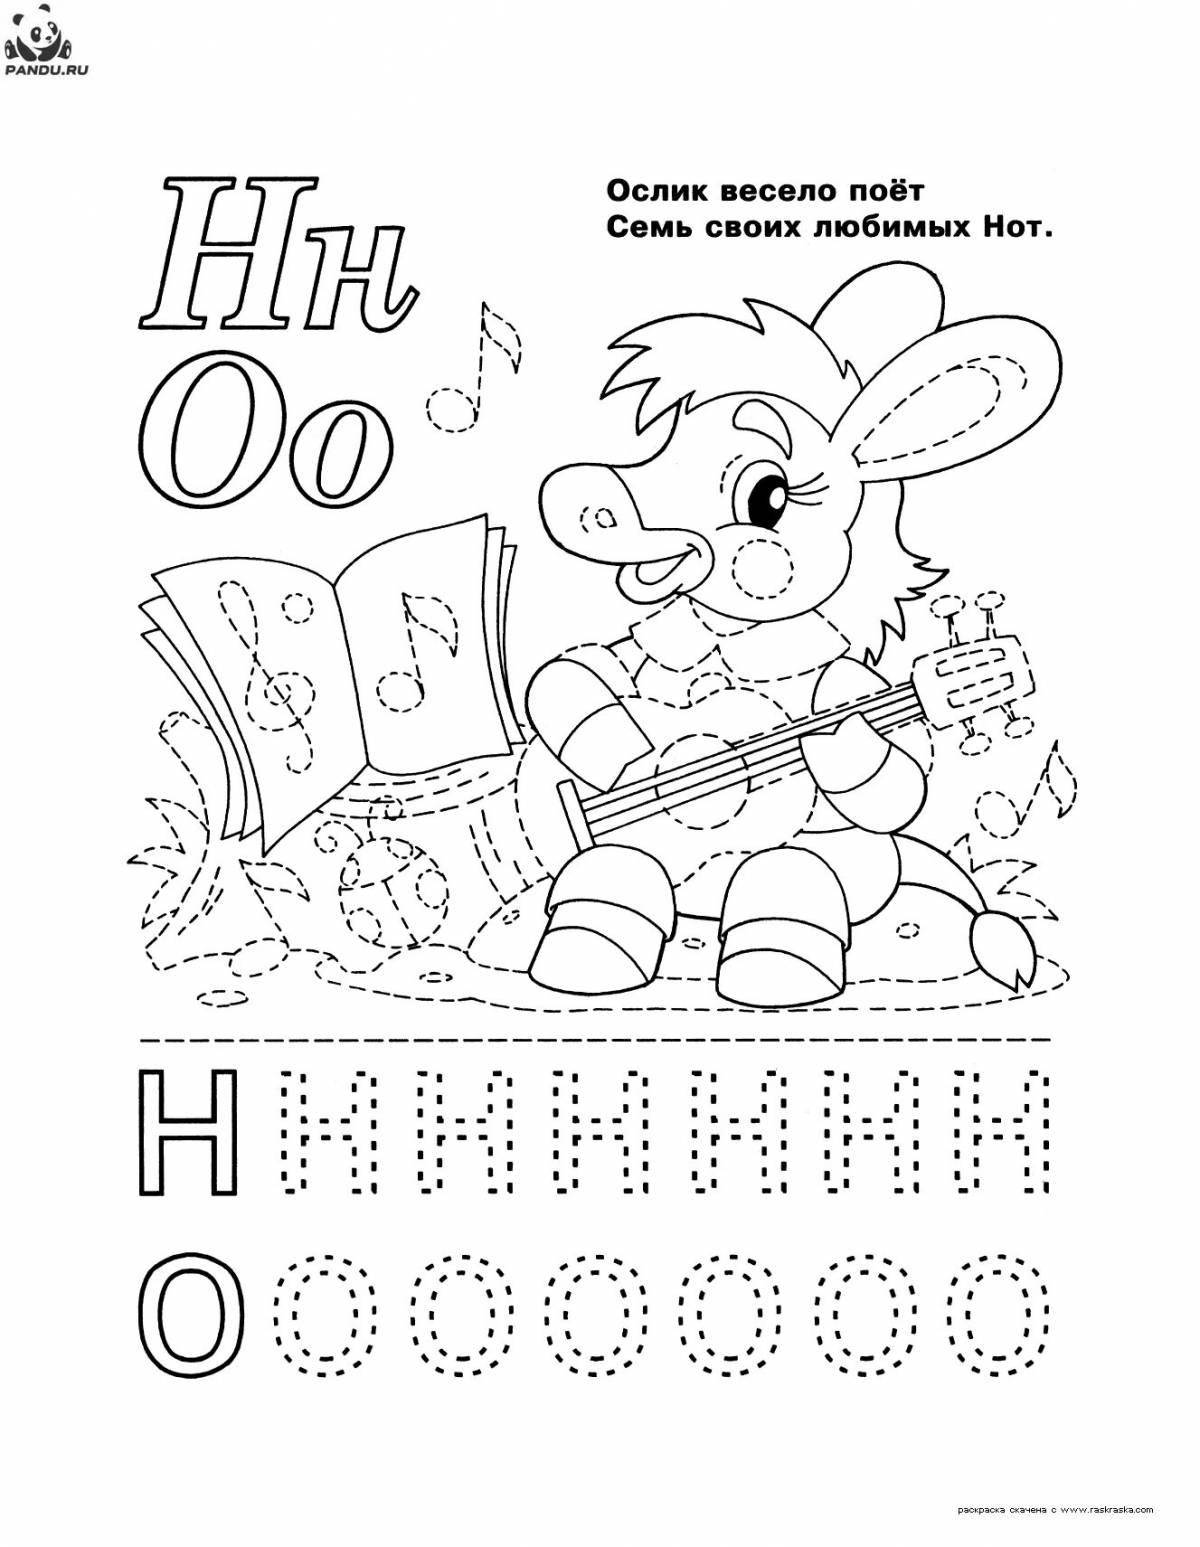 Colorful alphabet coloring page for preschoolers